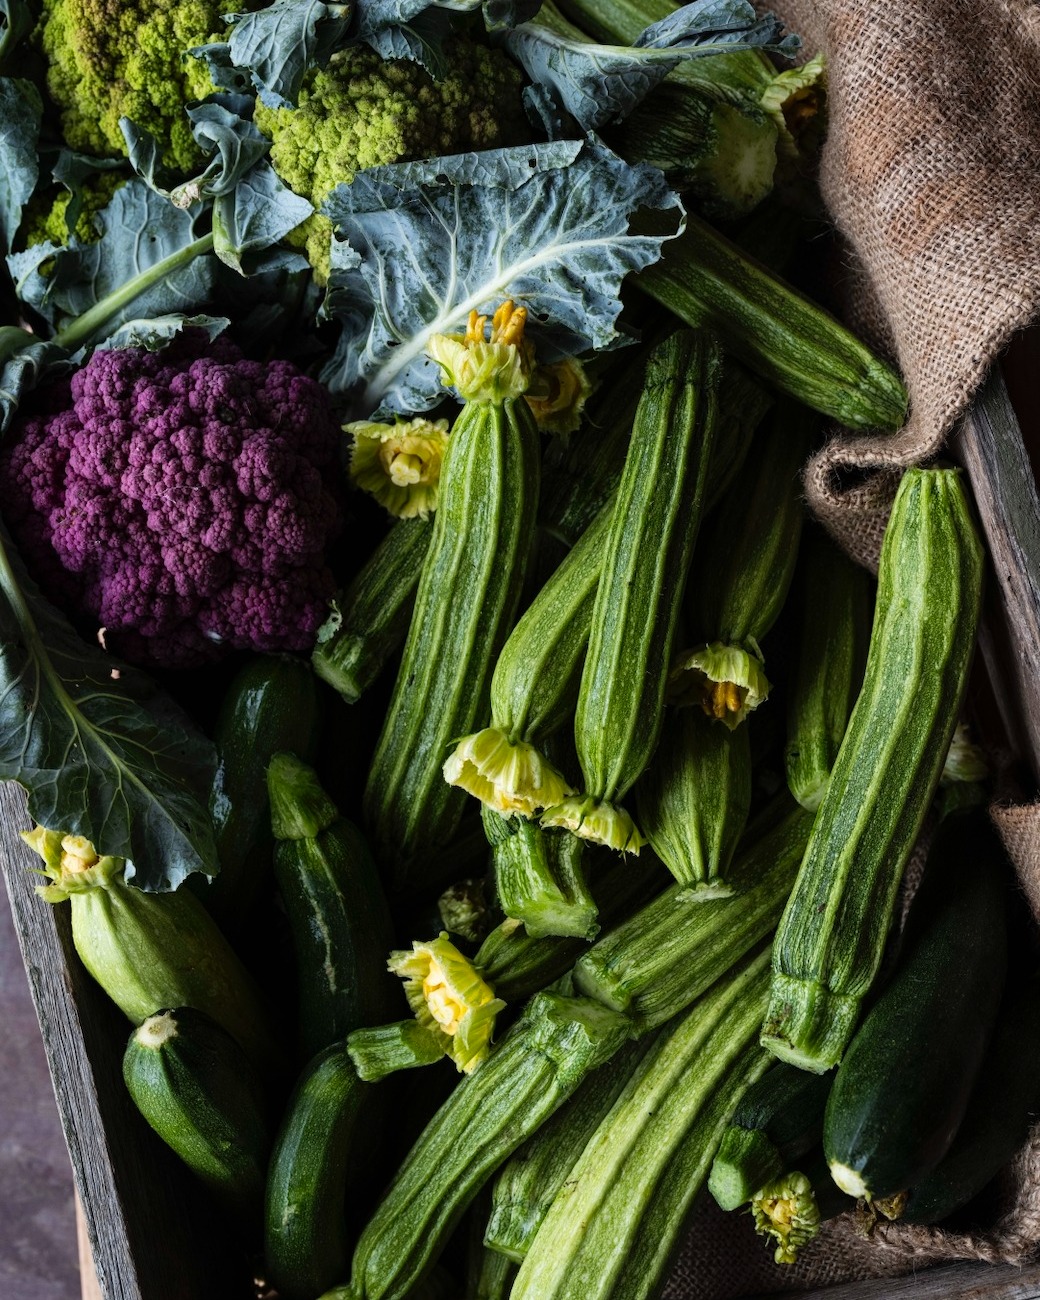 Savouring the season summer's bounty. 

Back on the 19th January.

Image by @brigidarnottphotography 

#fresh #vegetables #harvest #homegrown #farmtoplate